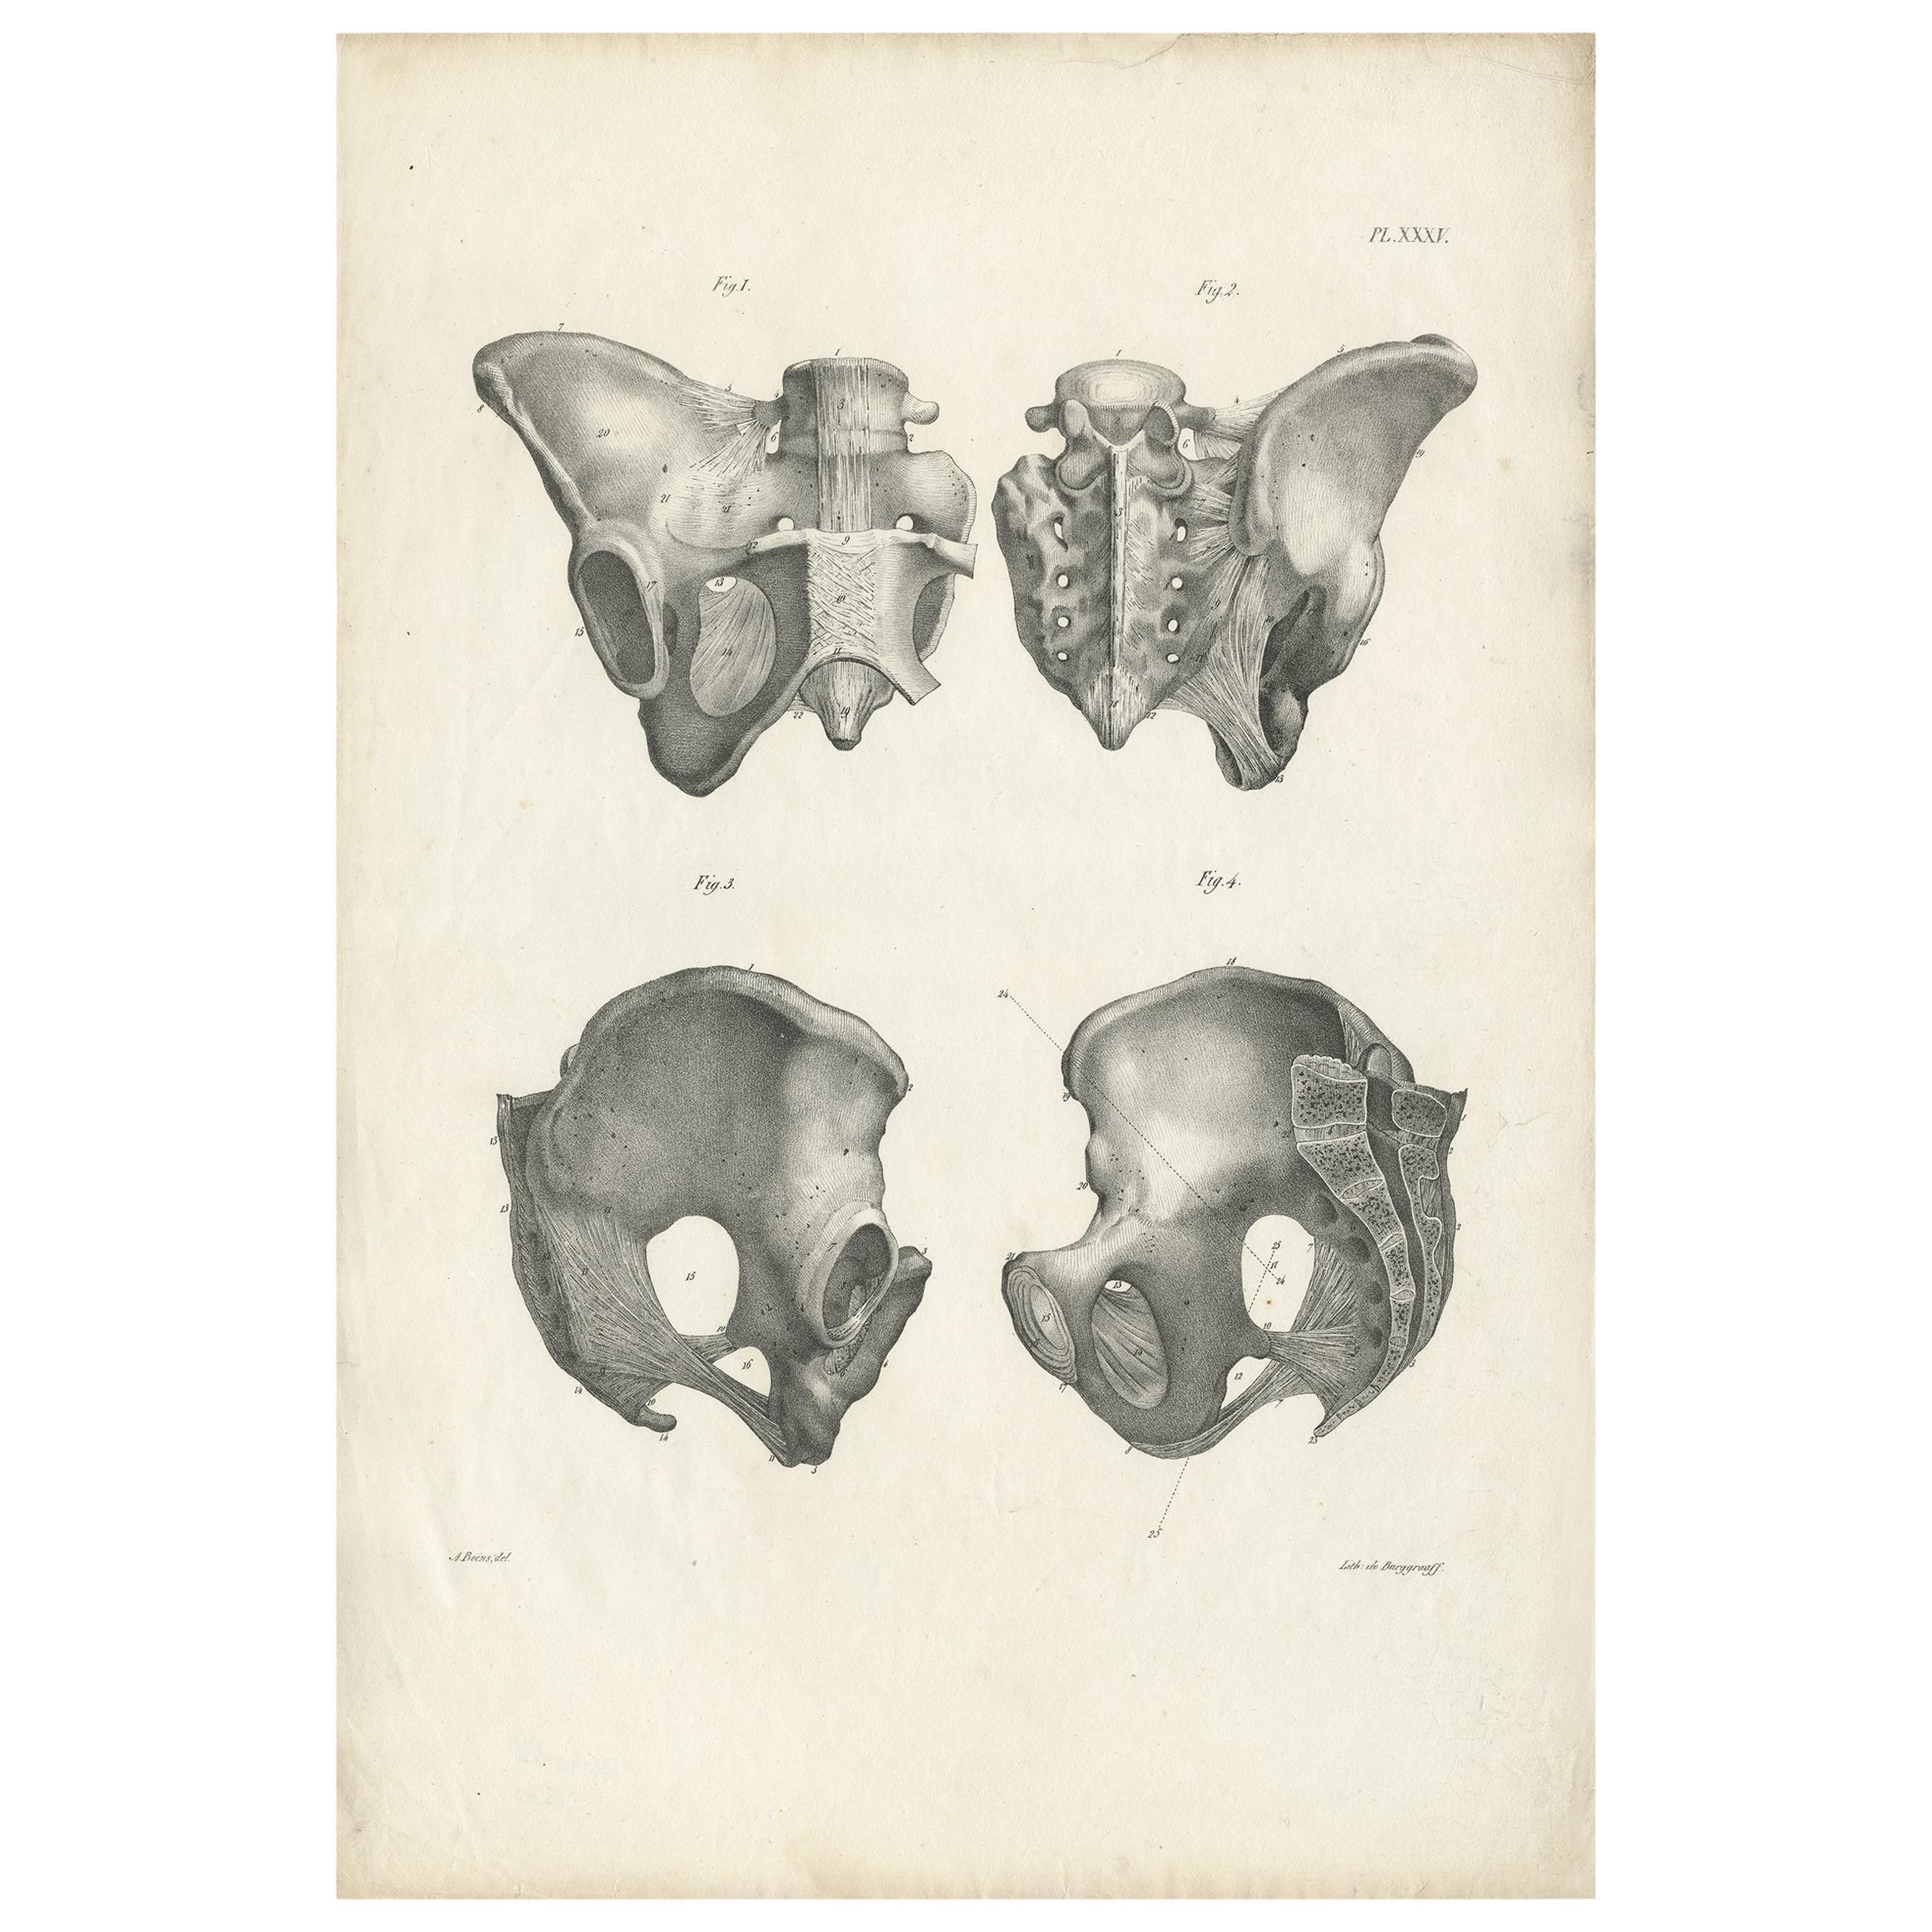 Antique Anatomy / Medical Print of the Pelvis by Cloquet, 1821